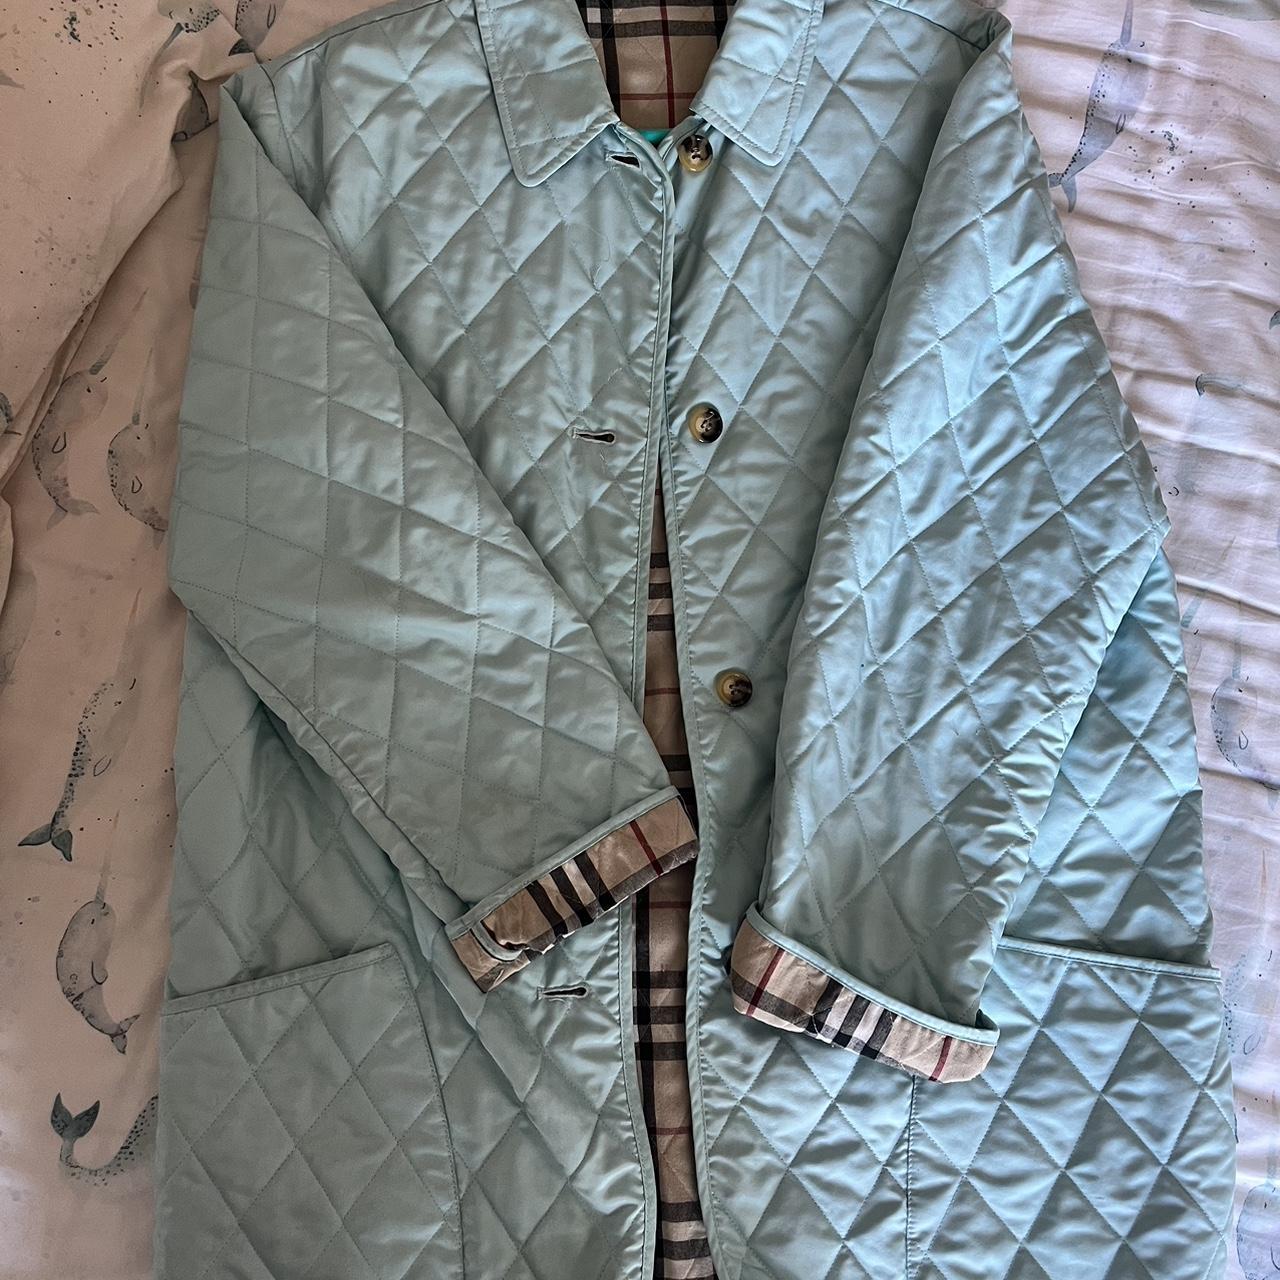 Burberry Women's White and Blue Jacket | Depop